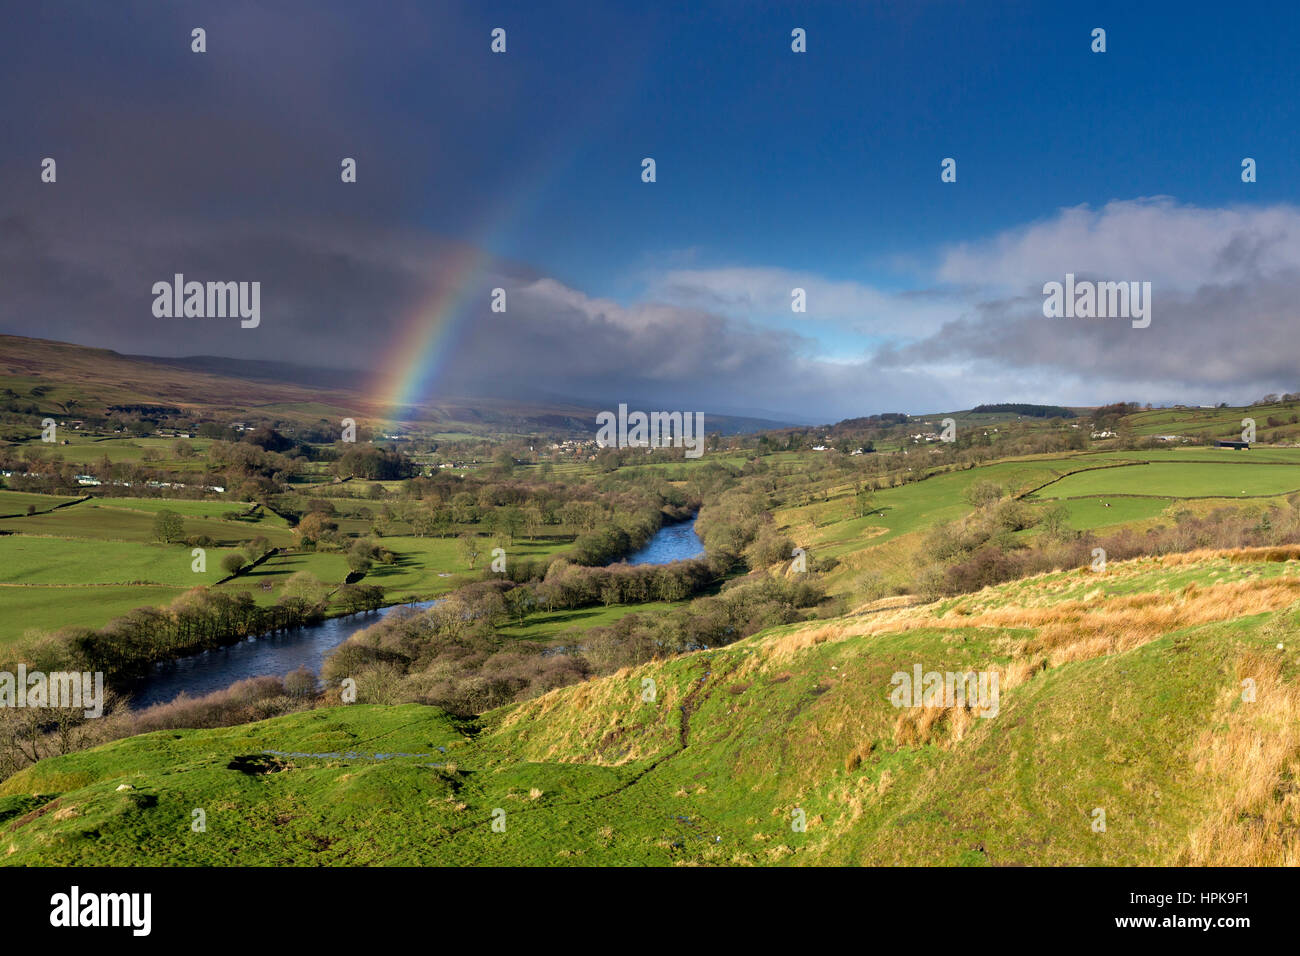 Whistle Crag, Middleton-in-Teesdale, County Durham. Thursday 23rd February 2017.  UK Weather.  Storm Doris.  Heavy overnight rain gives way to showers and rainbows as the centre of Storm Doris passes over the valley of Teesdale in County Durham. Credit: David Forster/Alamy Live News Stock Photo